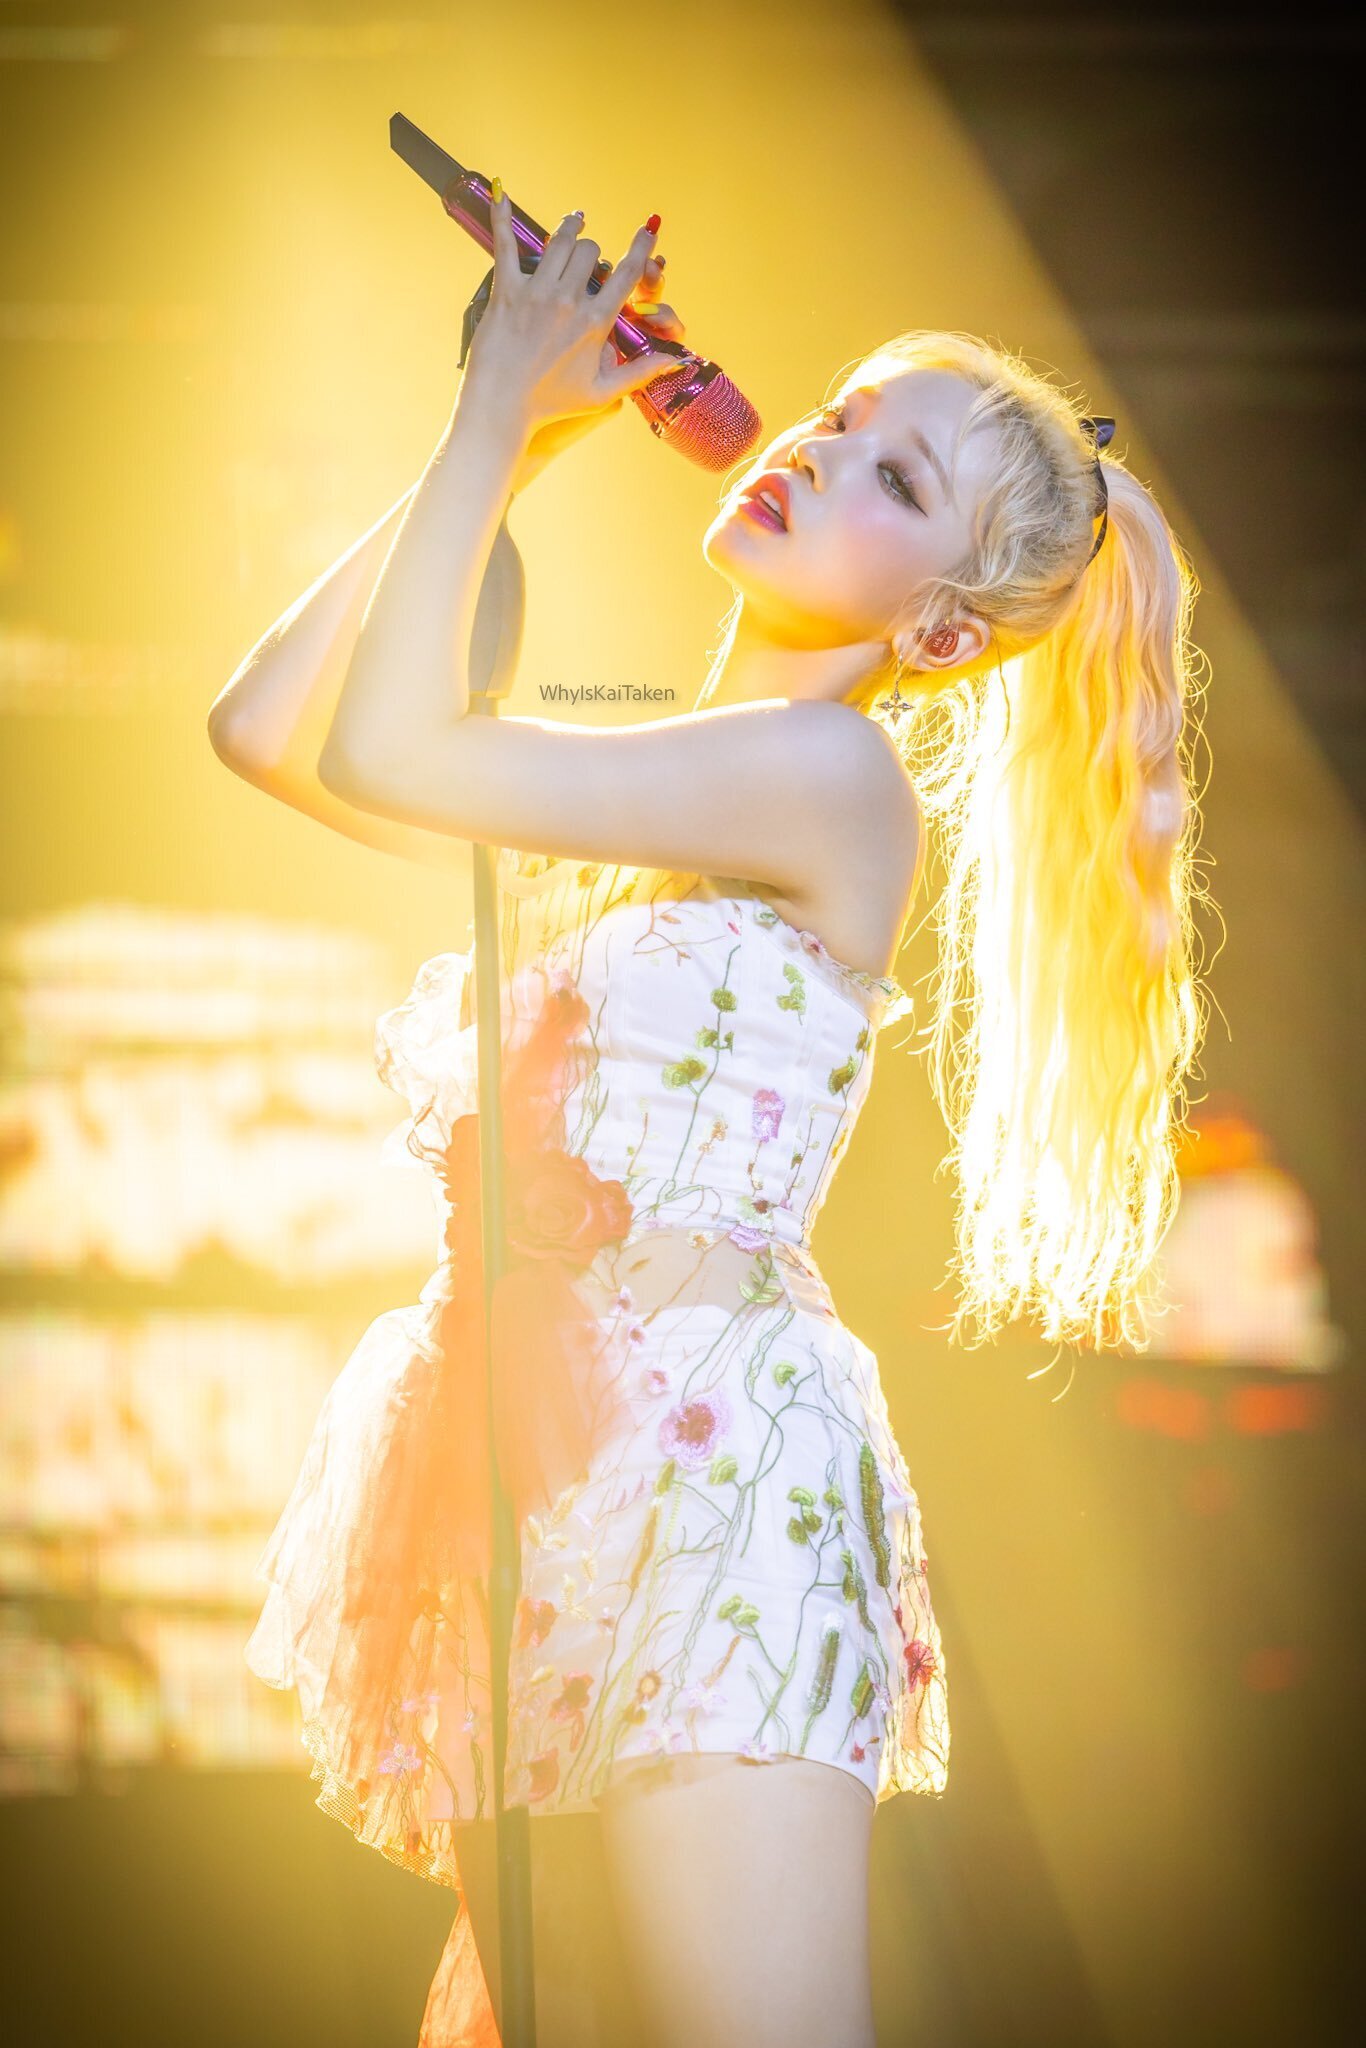 220730 (G)IDLE Yuqi 'Just Me ( )Idle' World Tour in Dallas kpopping